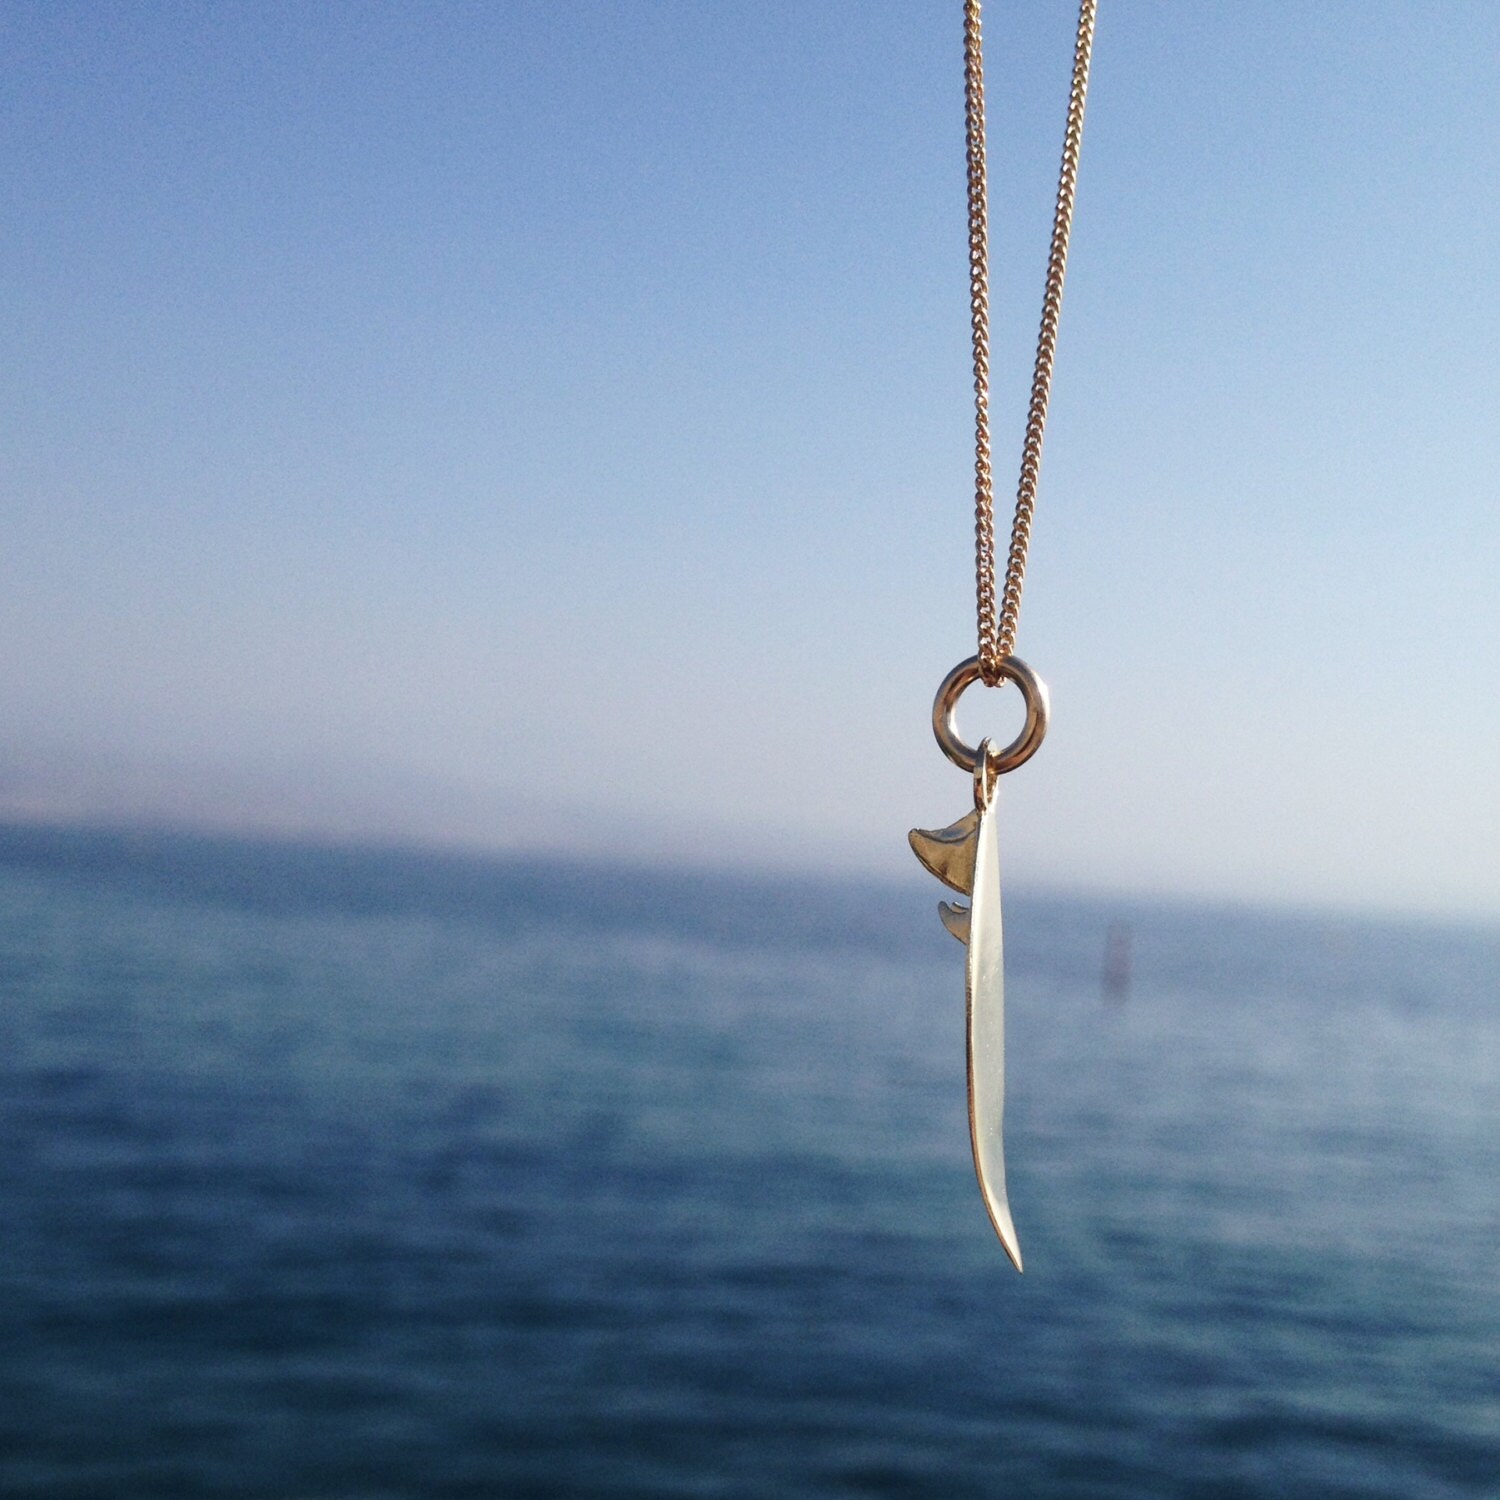 Surfboard necklace Surf jewelry Surfer jewelry Surf